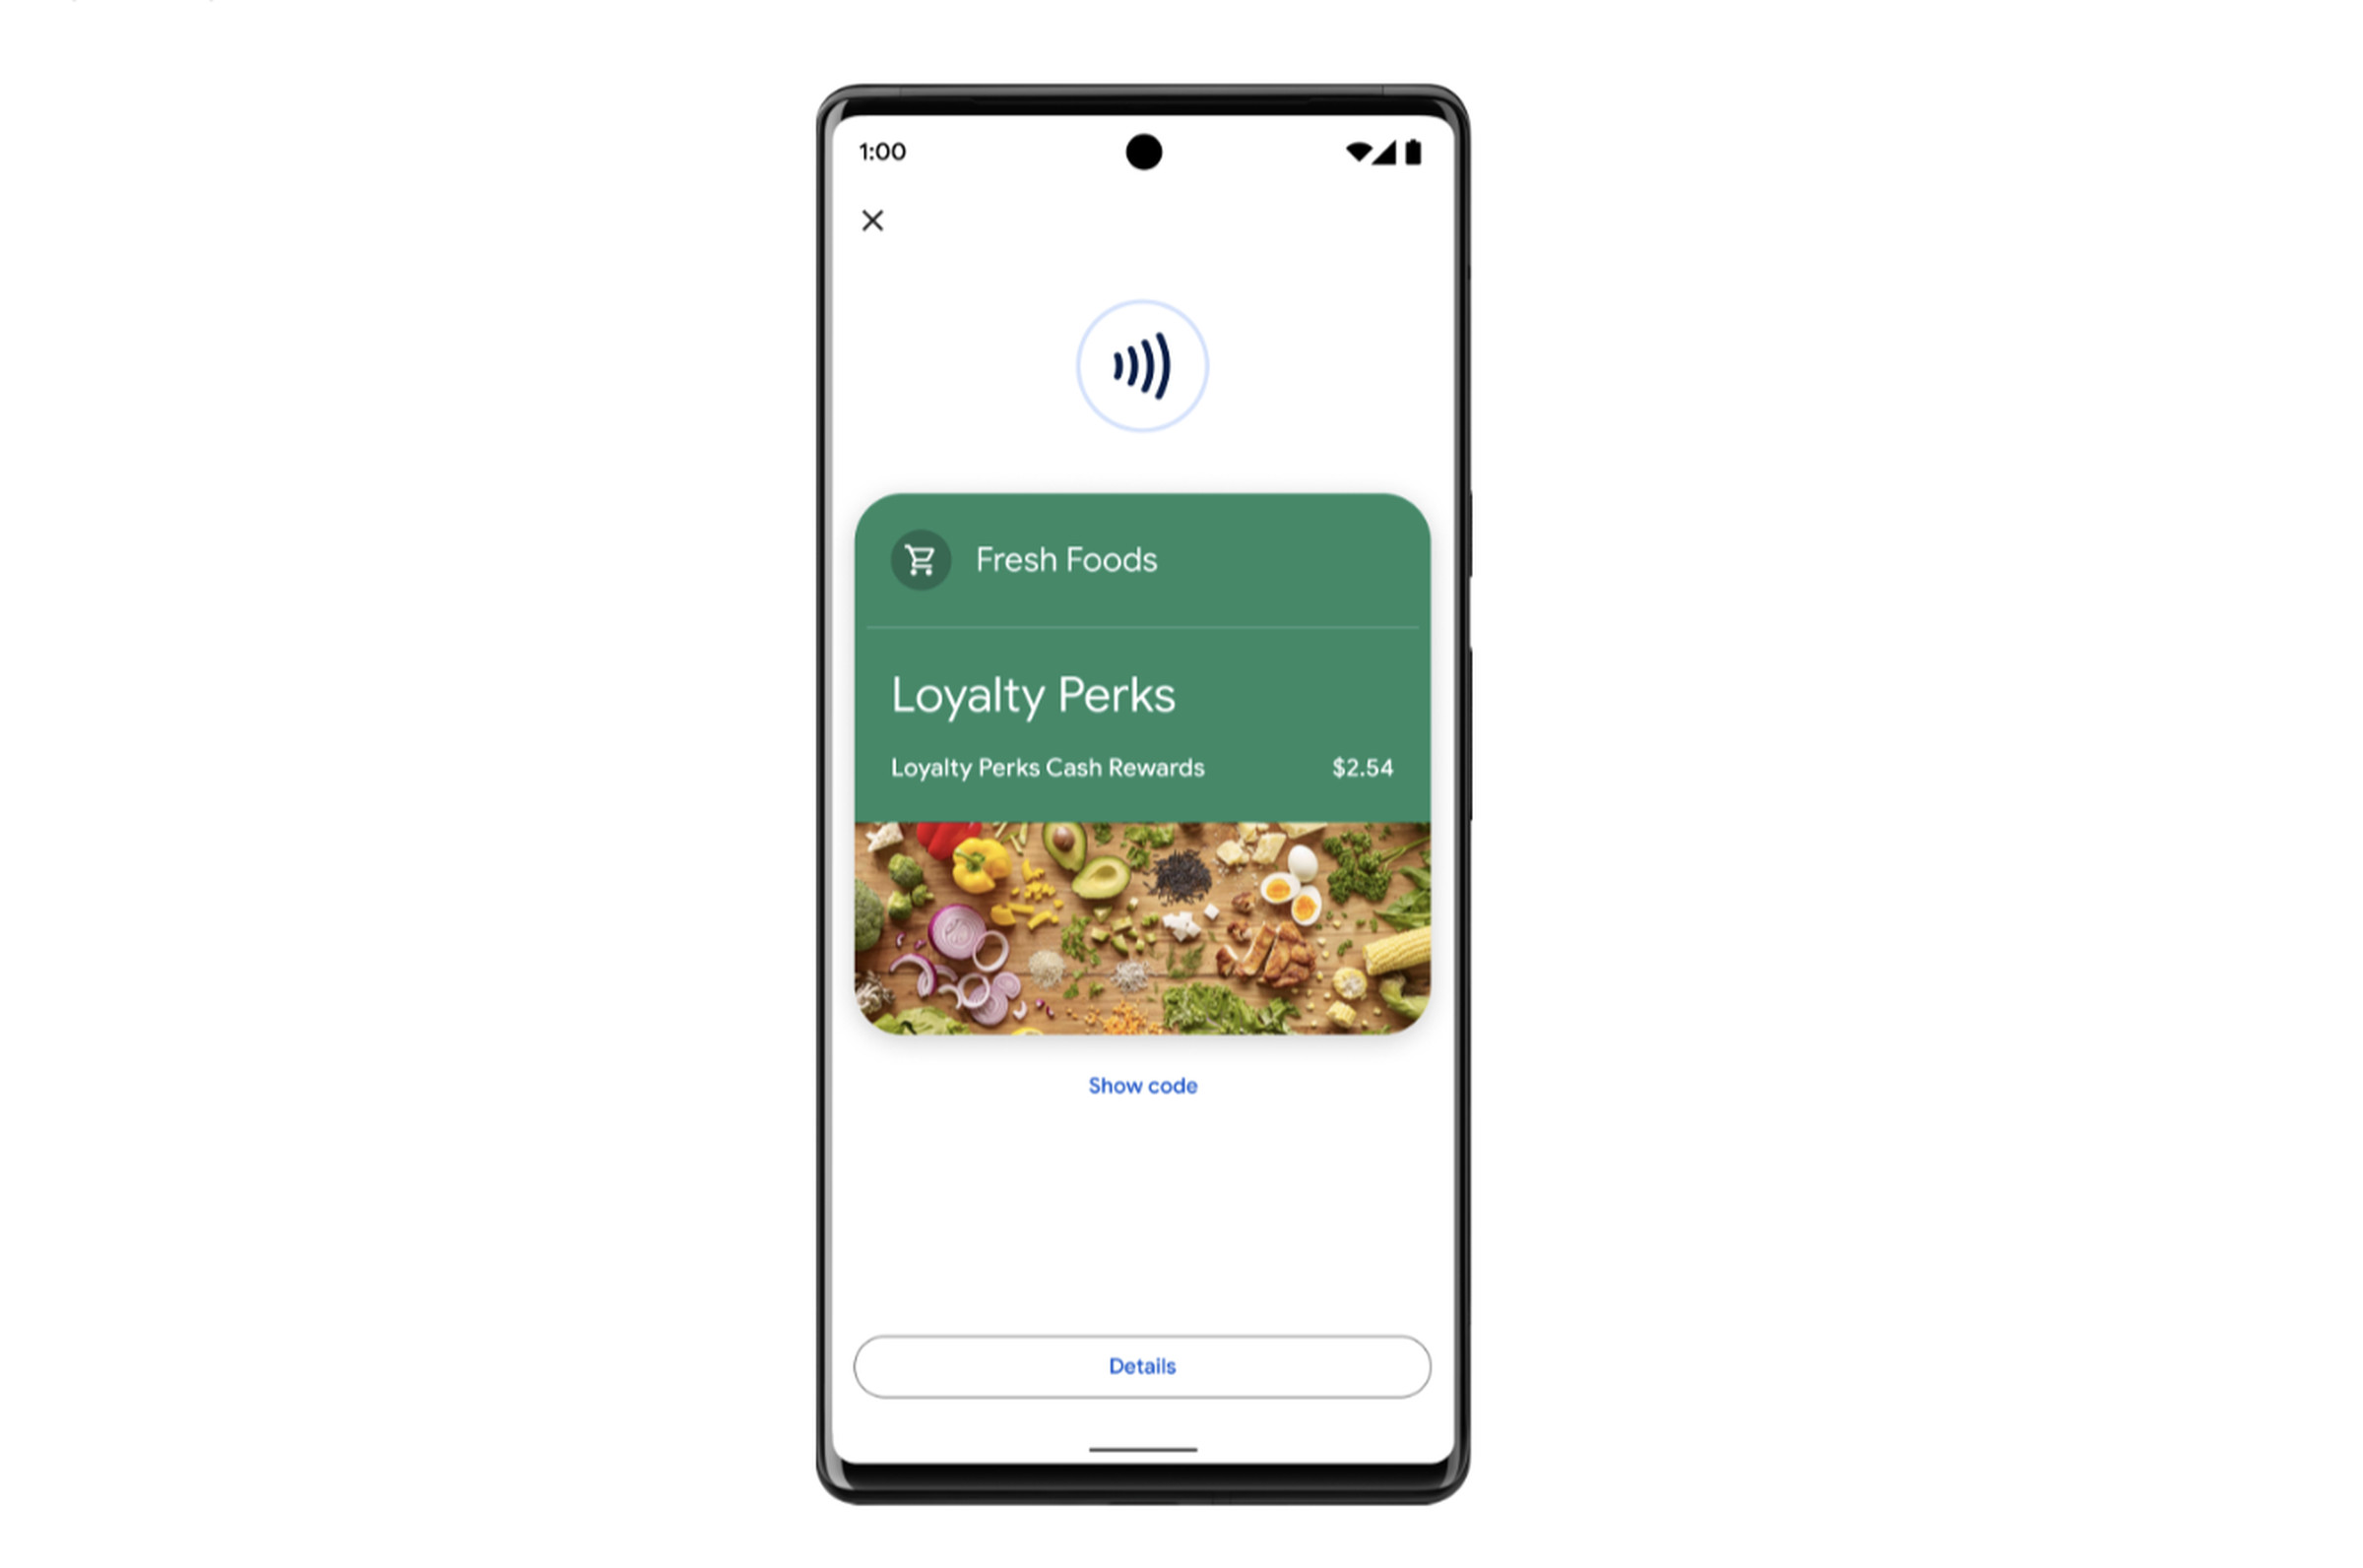 A phone featuring a loyalty rewards card to a grocery store